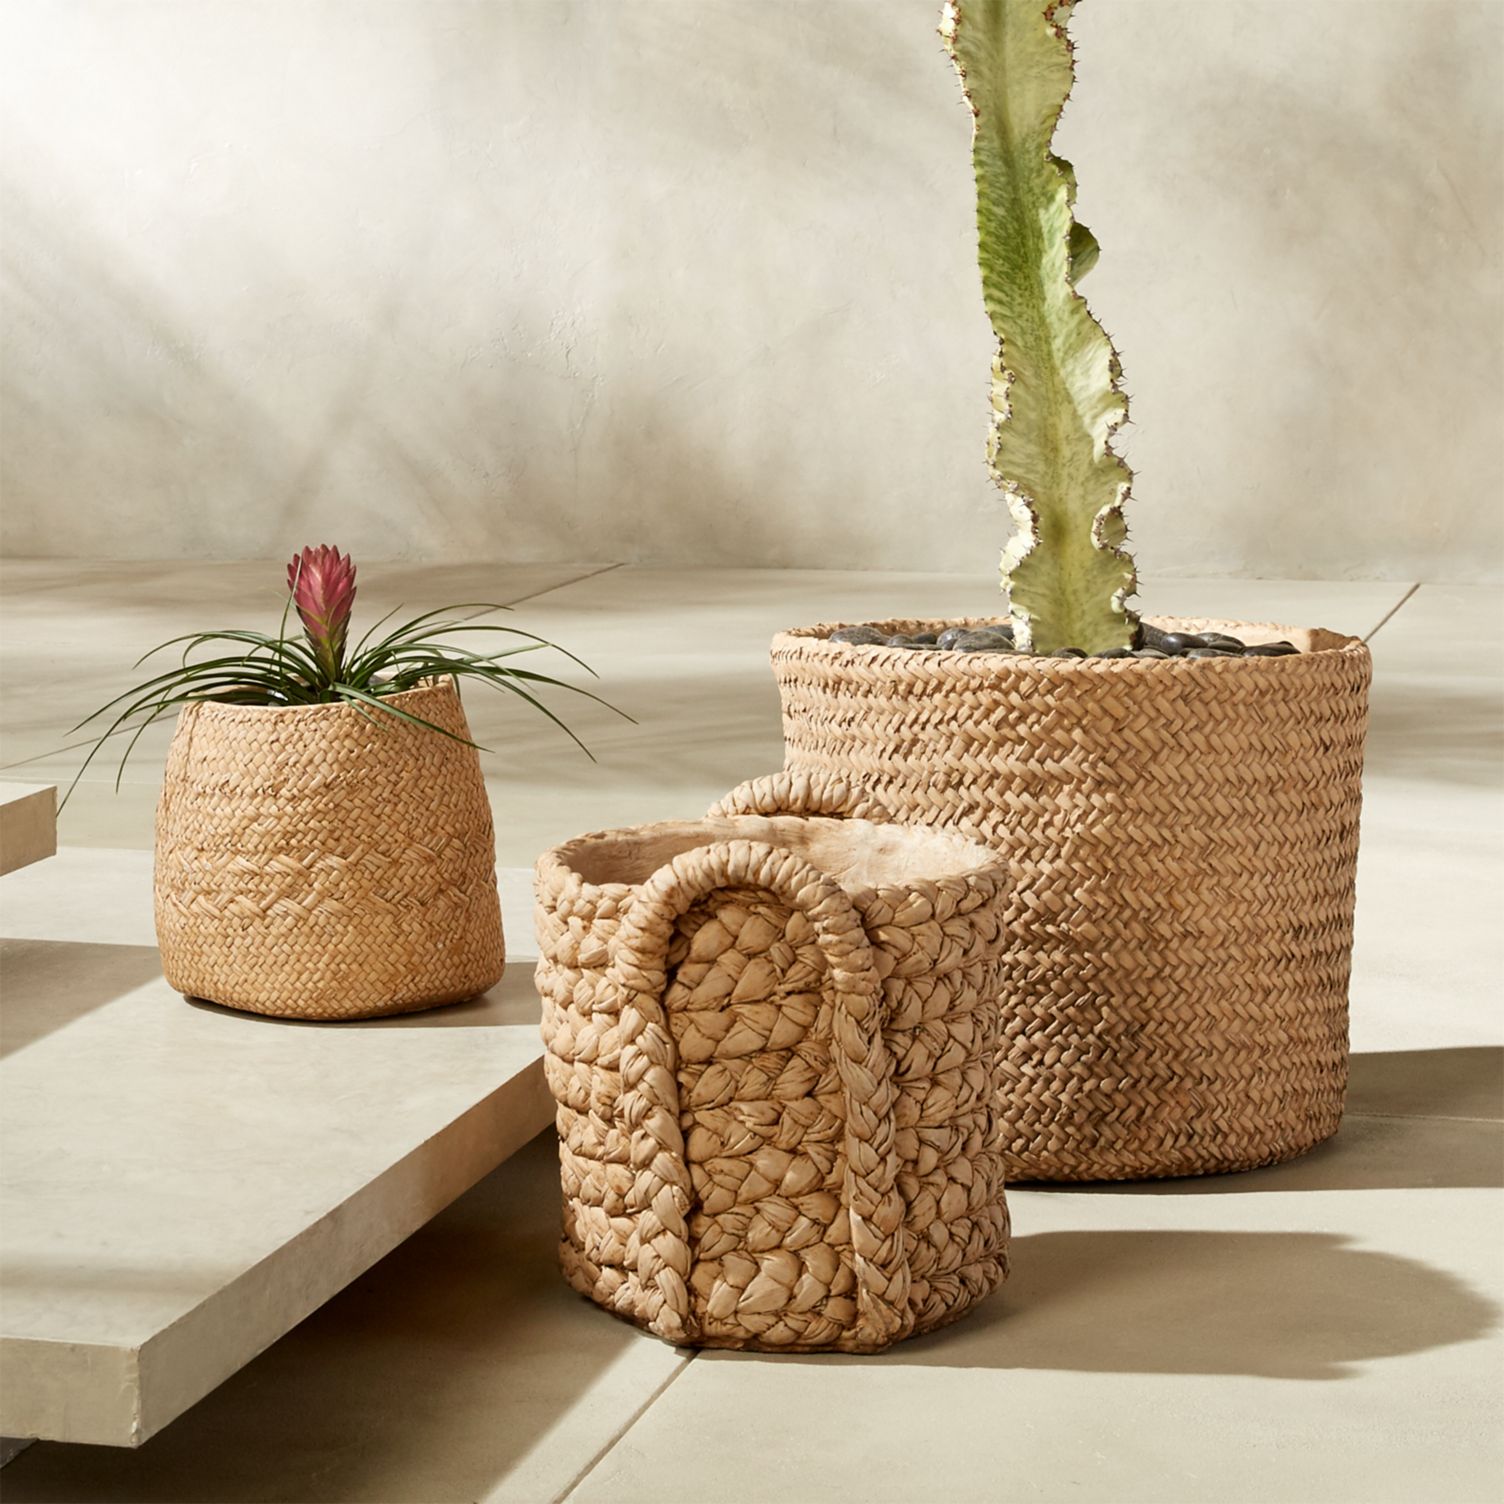 Cement-planter-baskets-with-a-woven-look